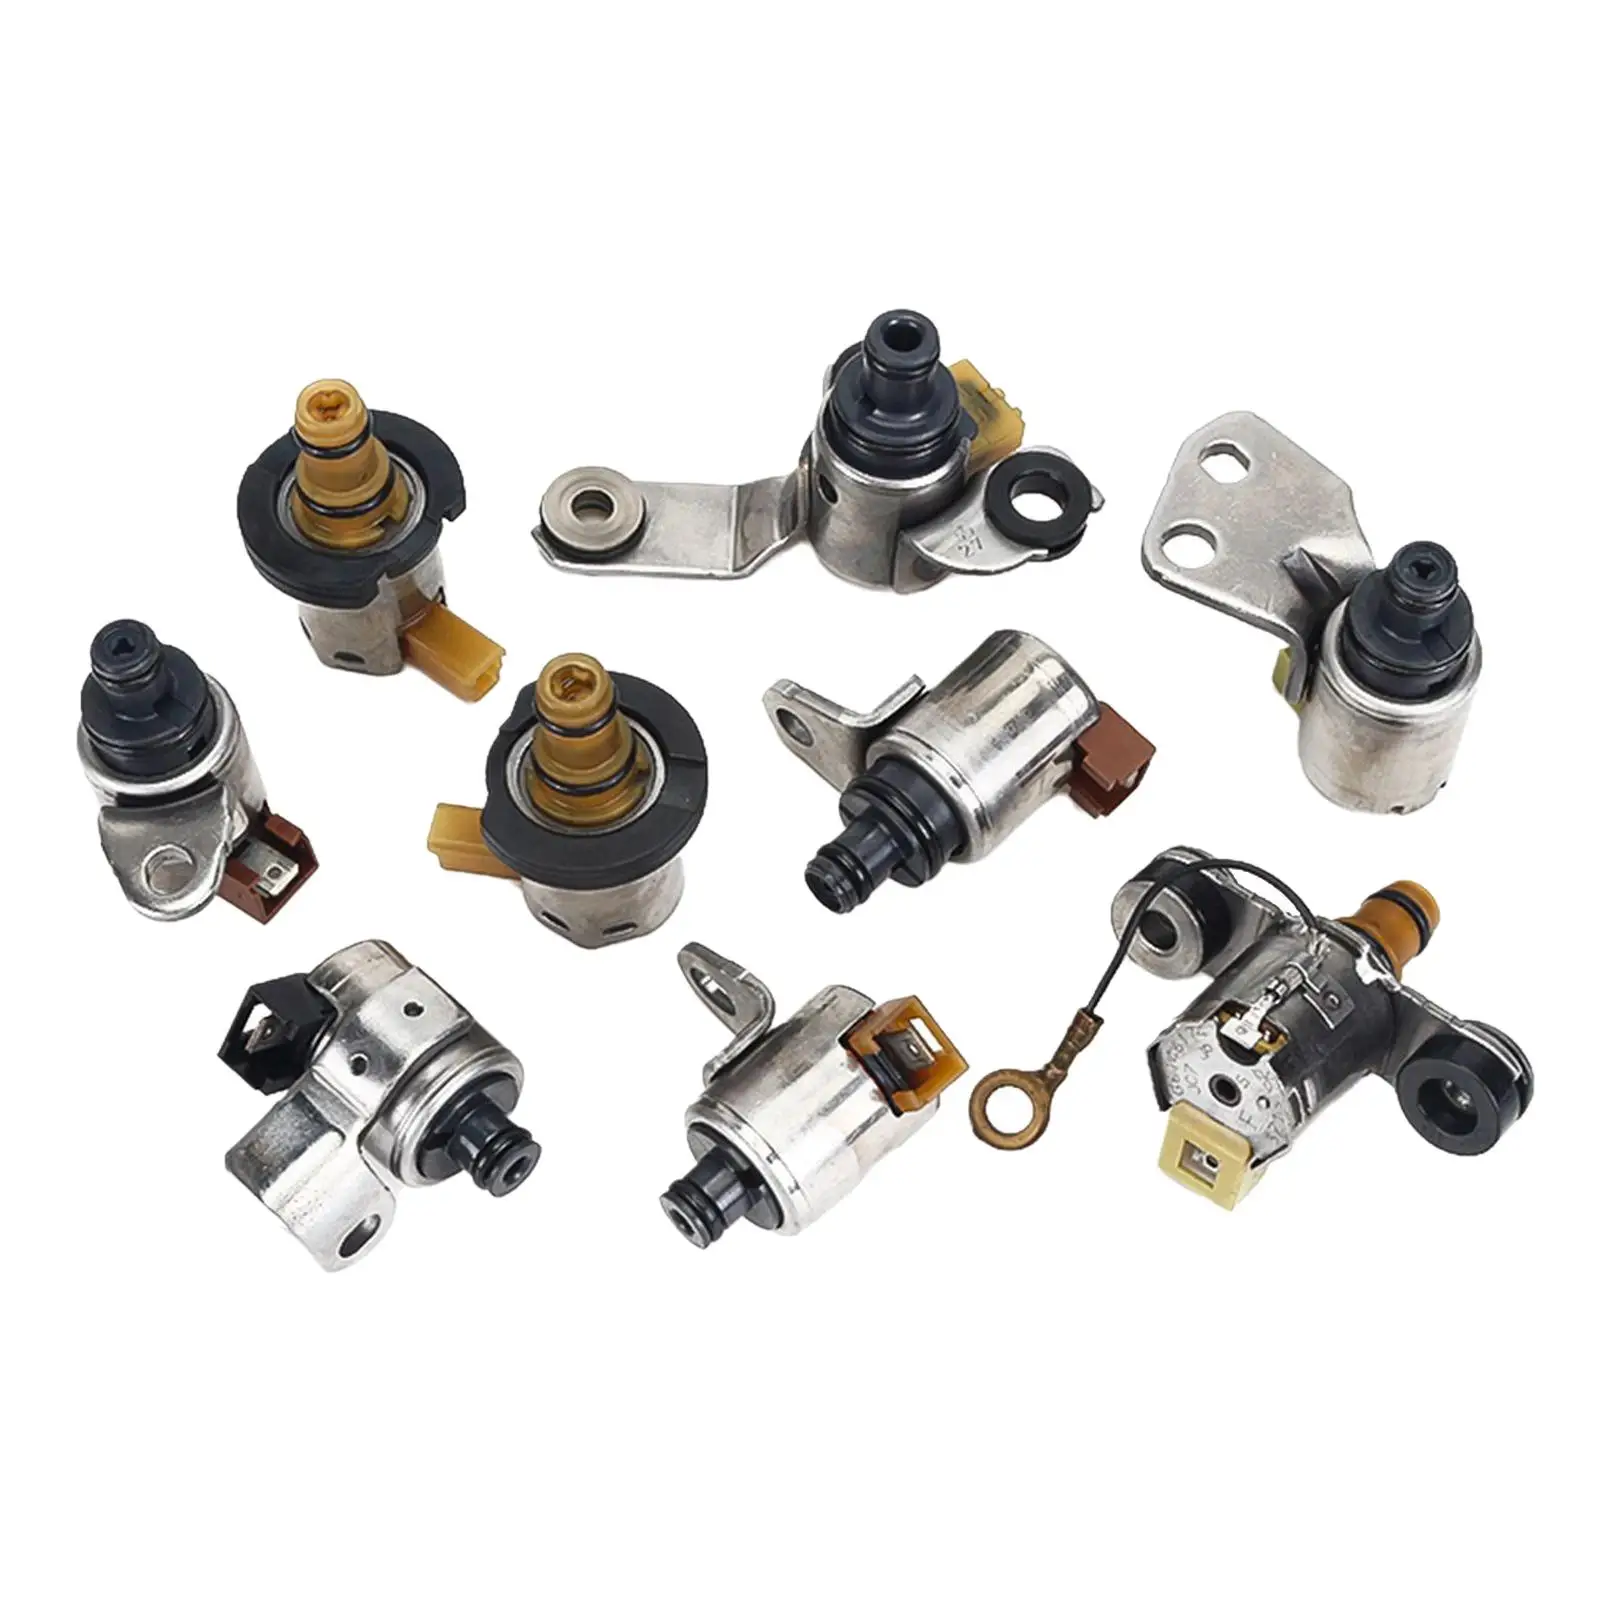 Automotive Transmission Shift Solenoid Set Jf506E for Ford 2002-2005 Accessory